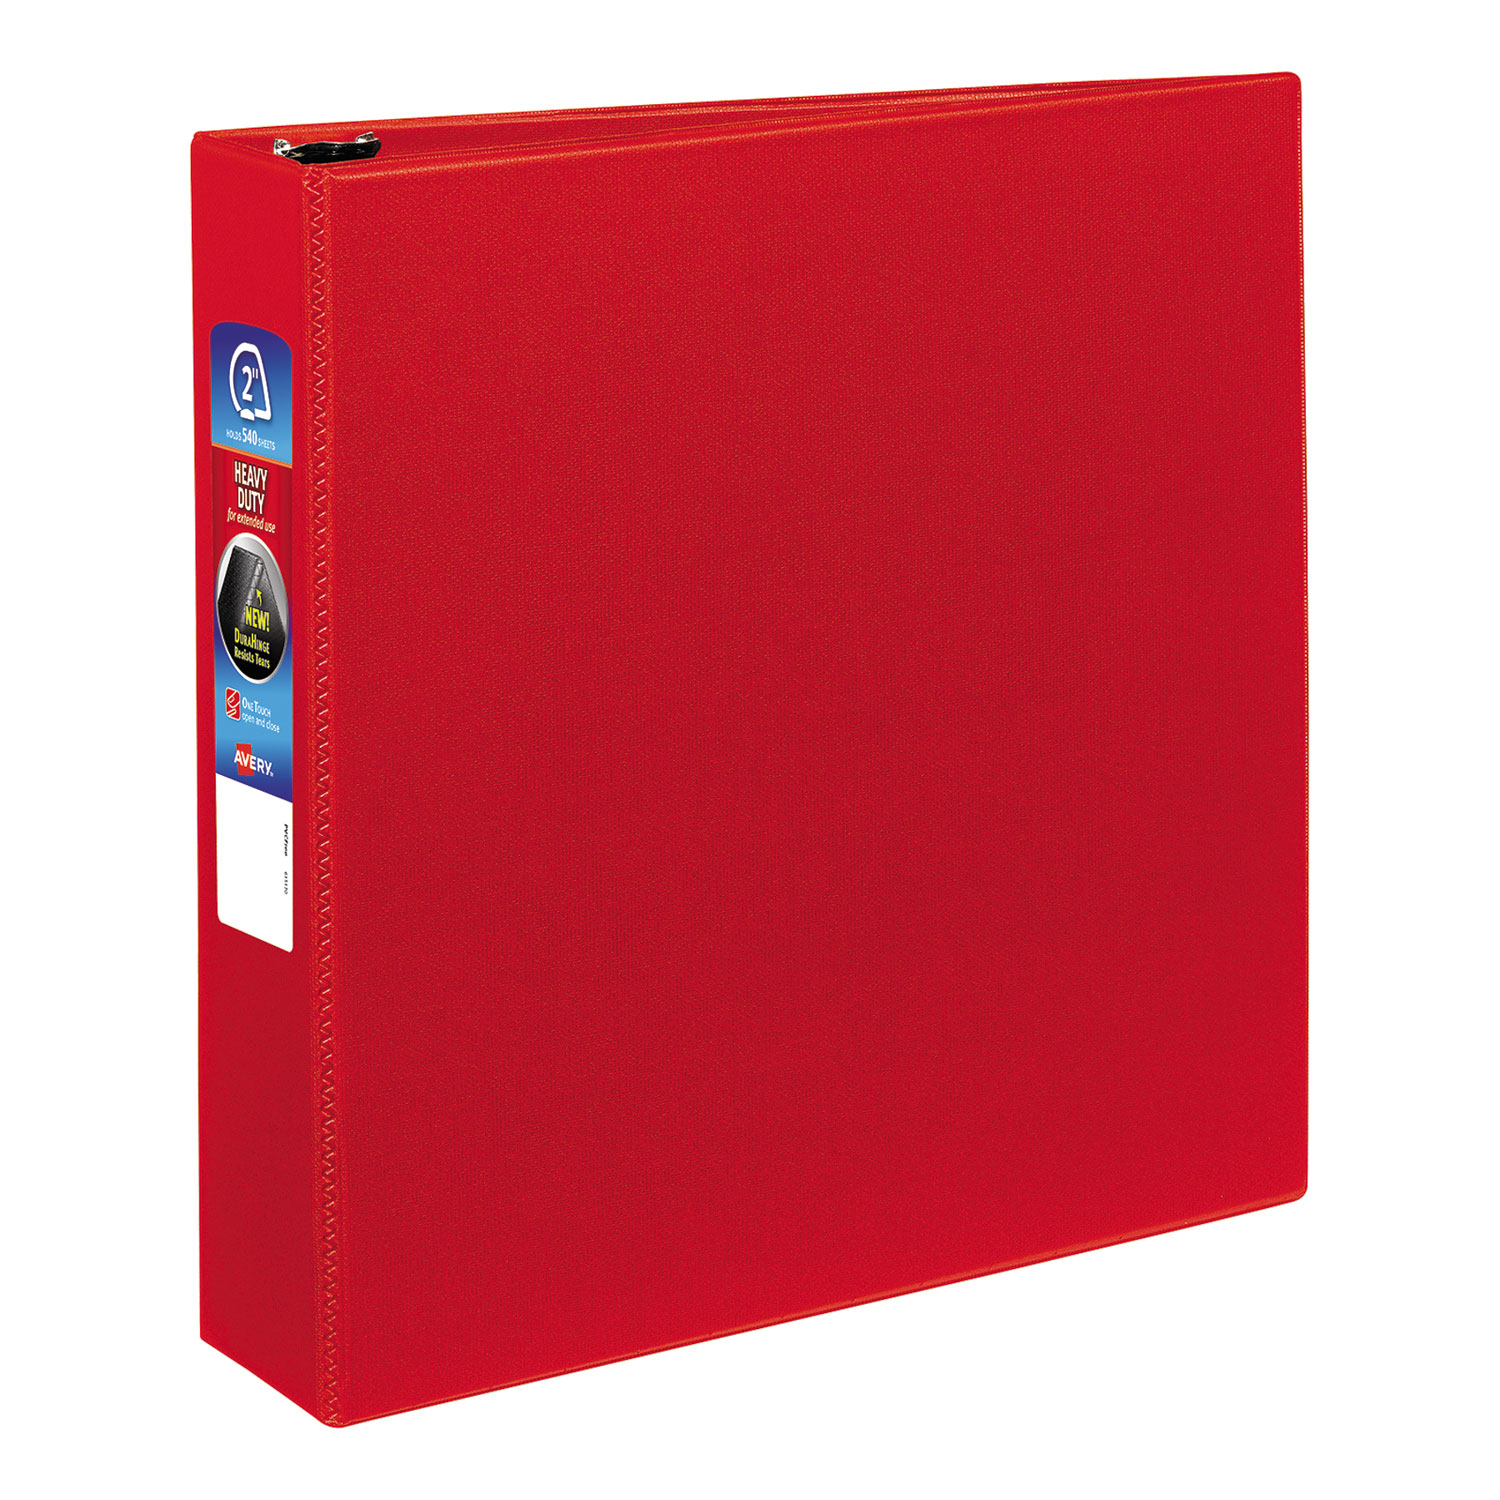  Avery 79582 Heavy-Duty Non-View Binder with DuraHinge and Locking One Touch EZD Rings, 3 Rings, 2 Capacity, 11 x 8.5, Red (AVE79582) 